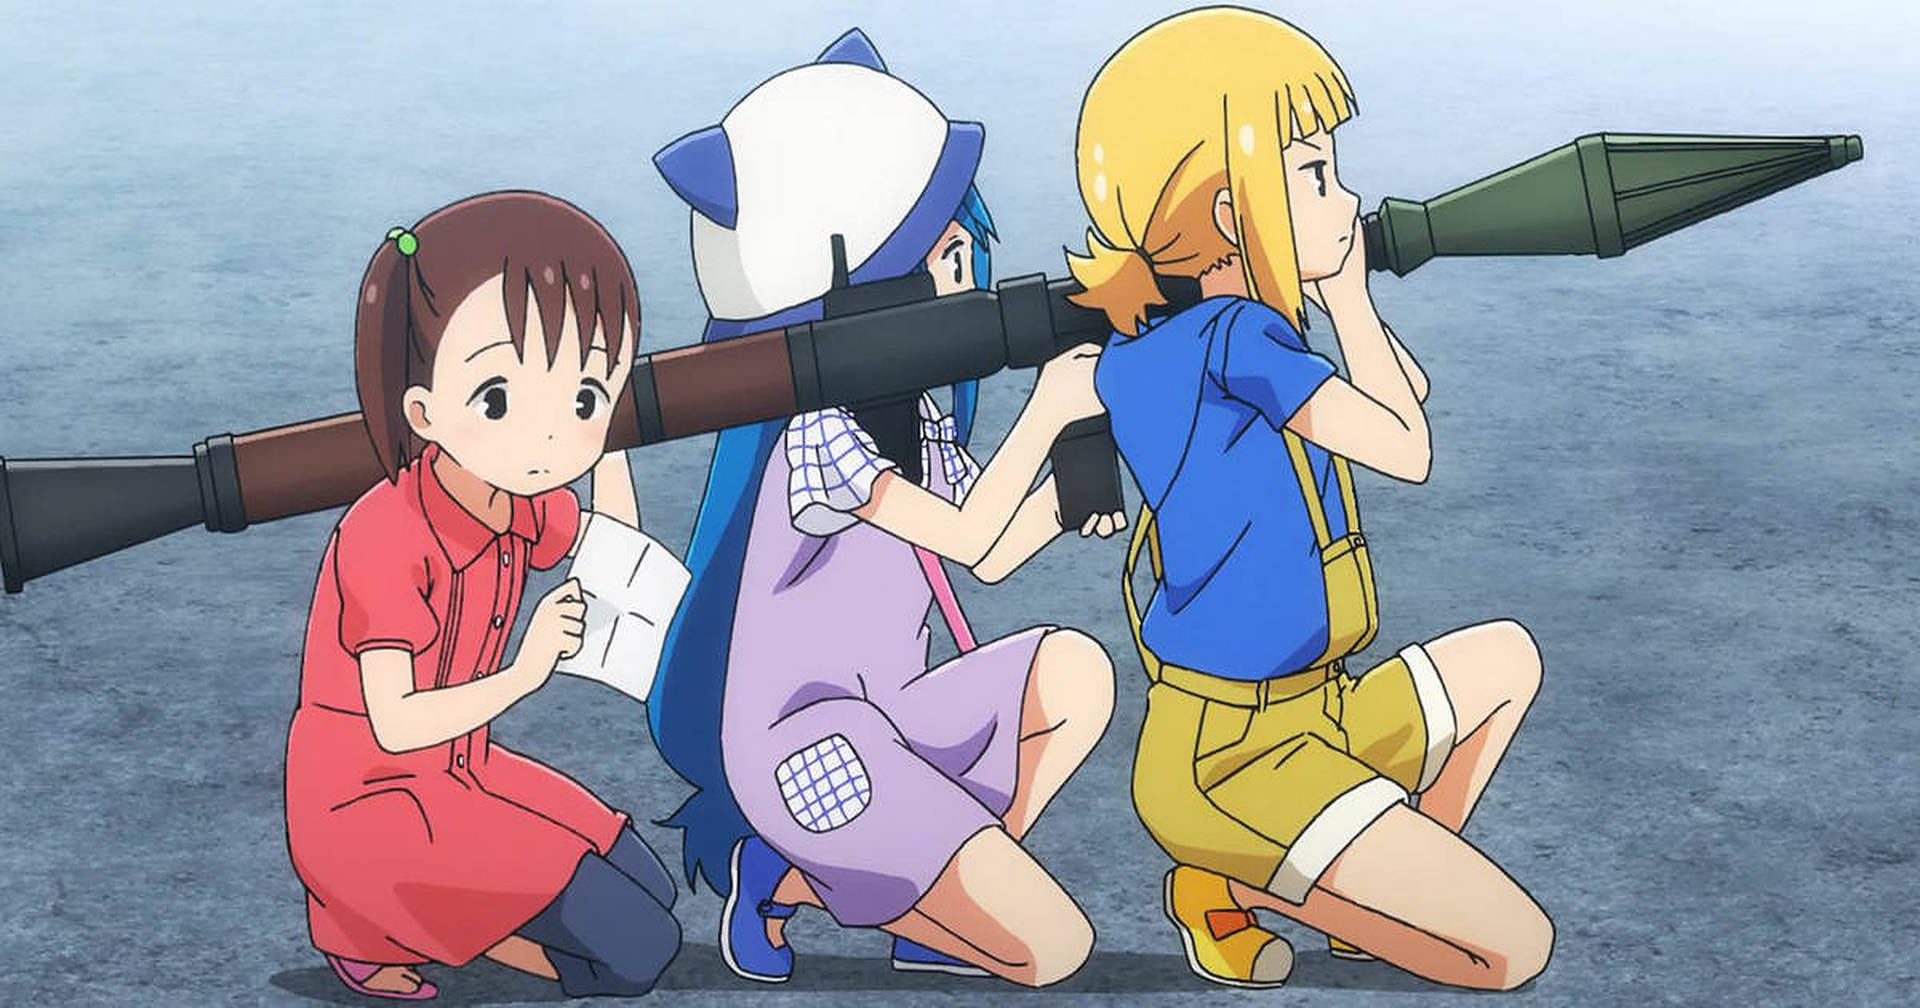 Anime Kids With Rocket Launcher